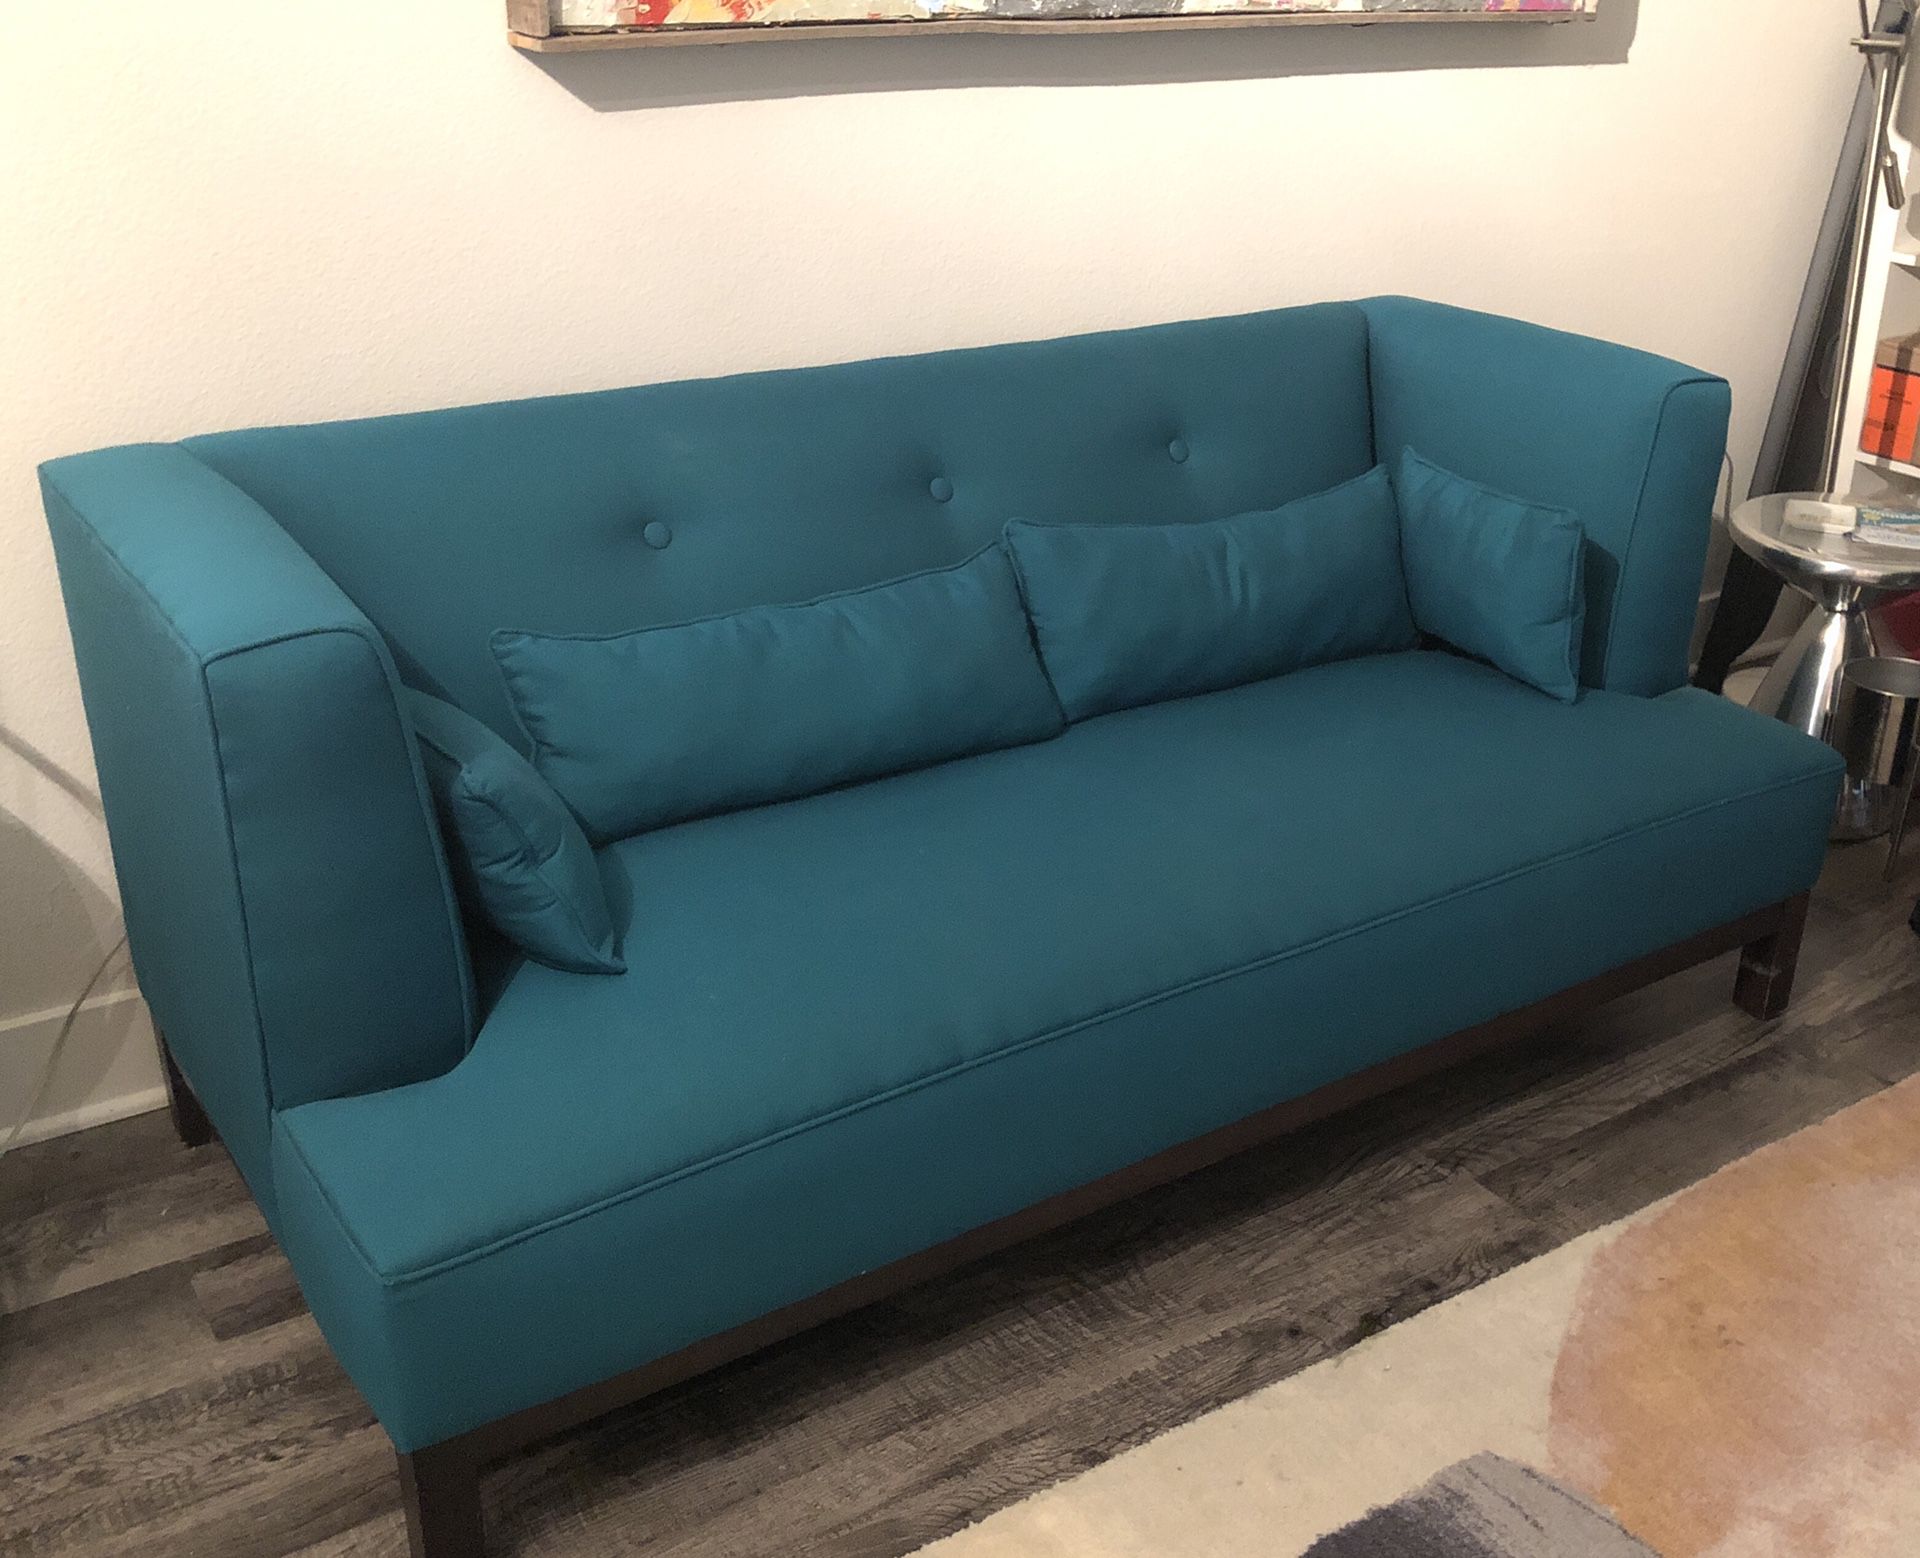 Crate & Barrel Newly Refurbished Turquoise couch